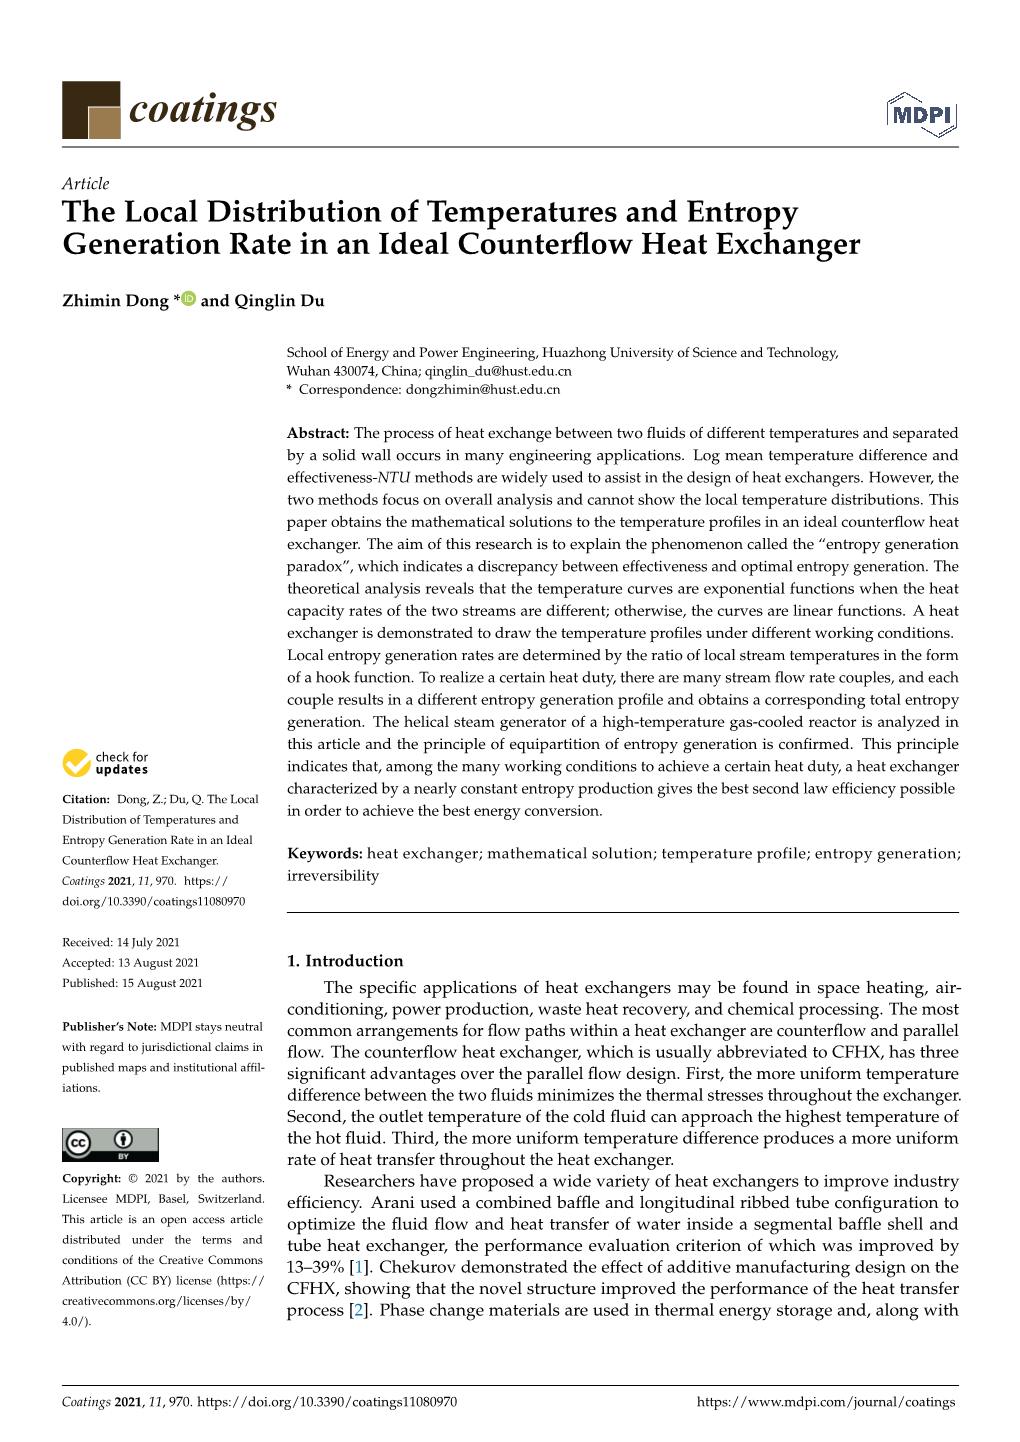 The Local Distribution of Temperatures and Entropy Generation Rate in an Ideal Counterﬂow Heat Exchanger